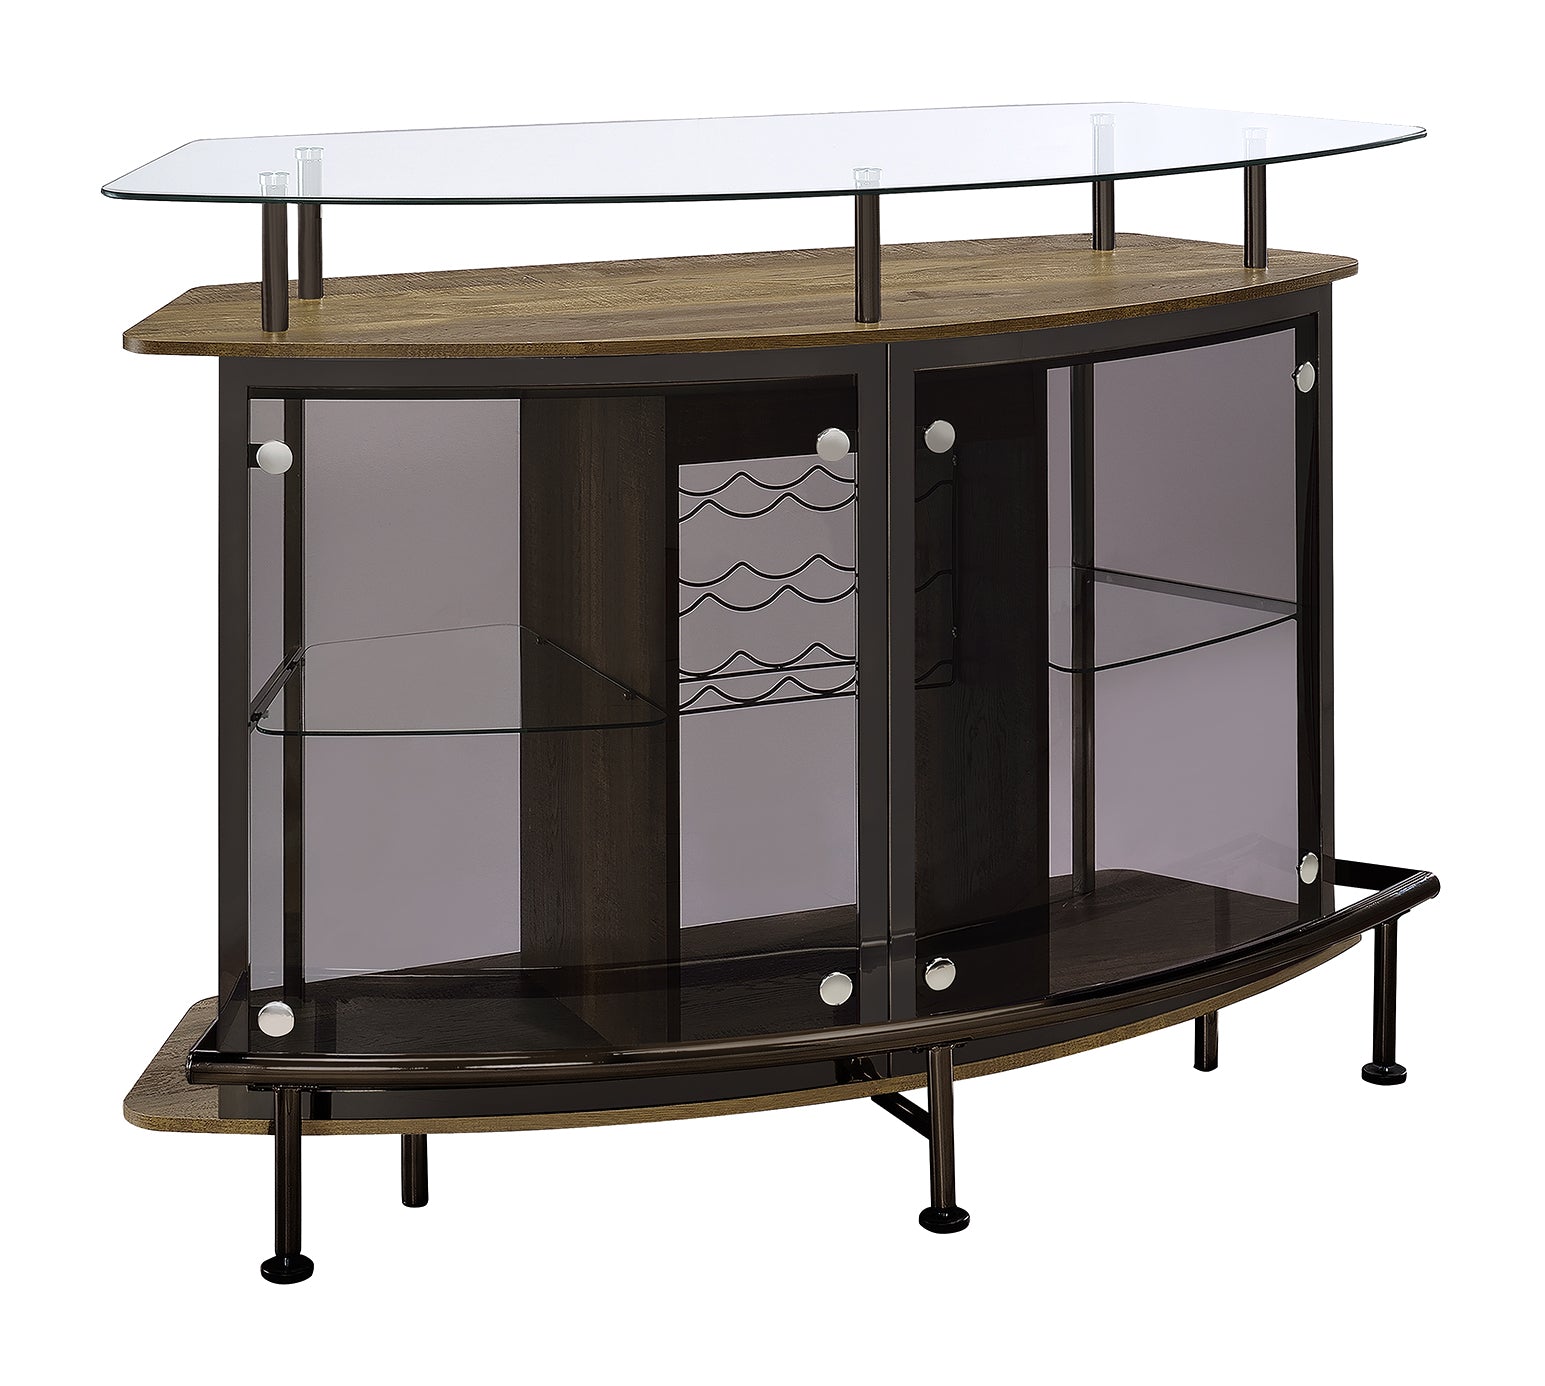 Gideon Crescent Shaped Glass Top Bar Unit with Drawer Home Bar Brown